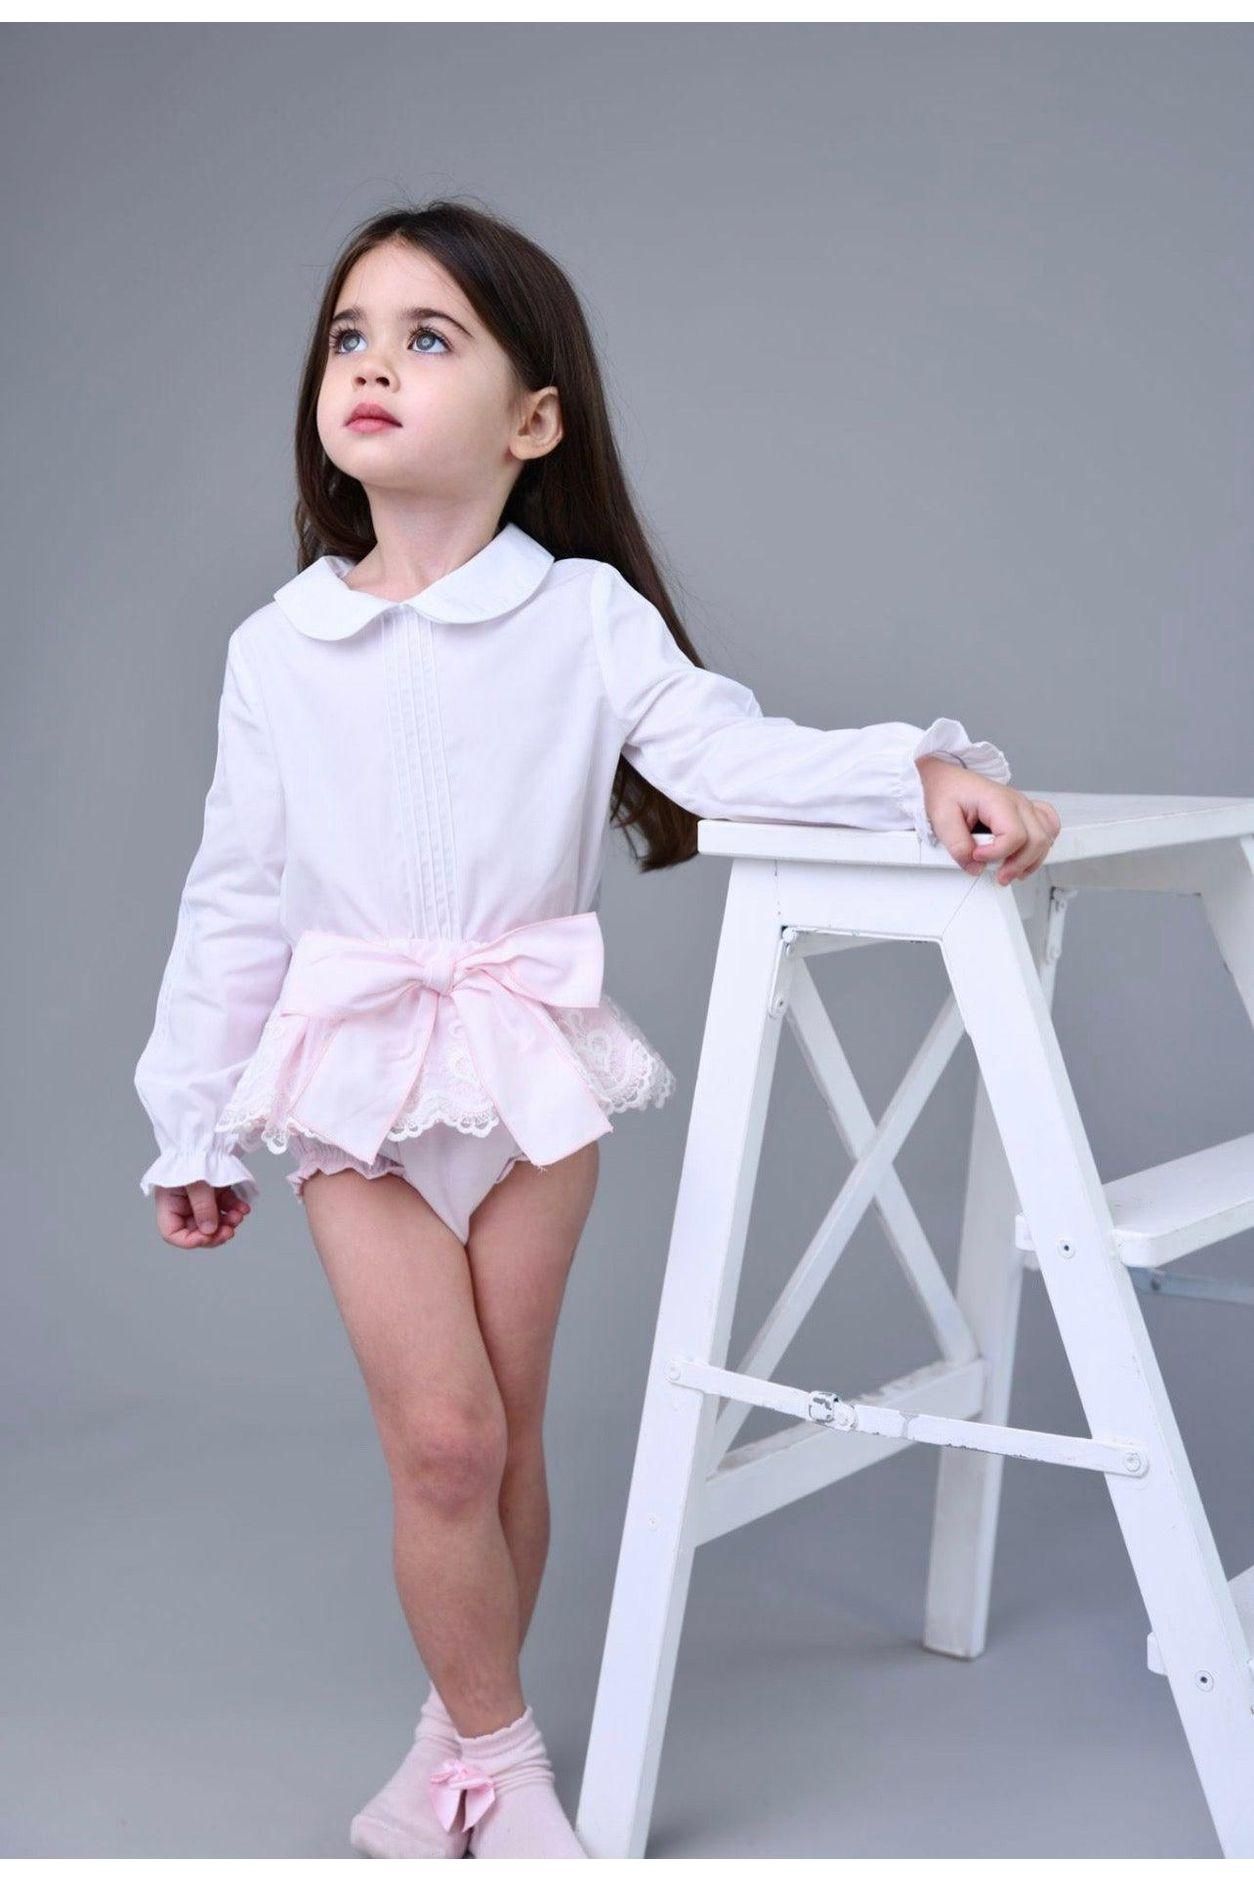 AW23 Phi Clothing Pink Lace Bloomers Dainty Delilah 